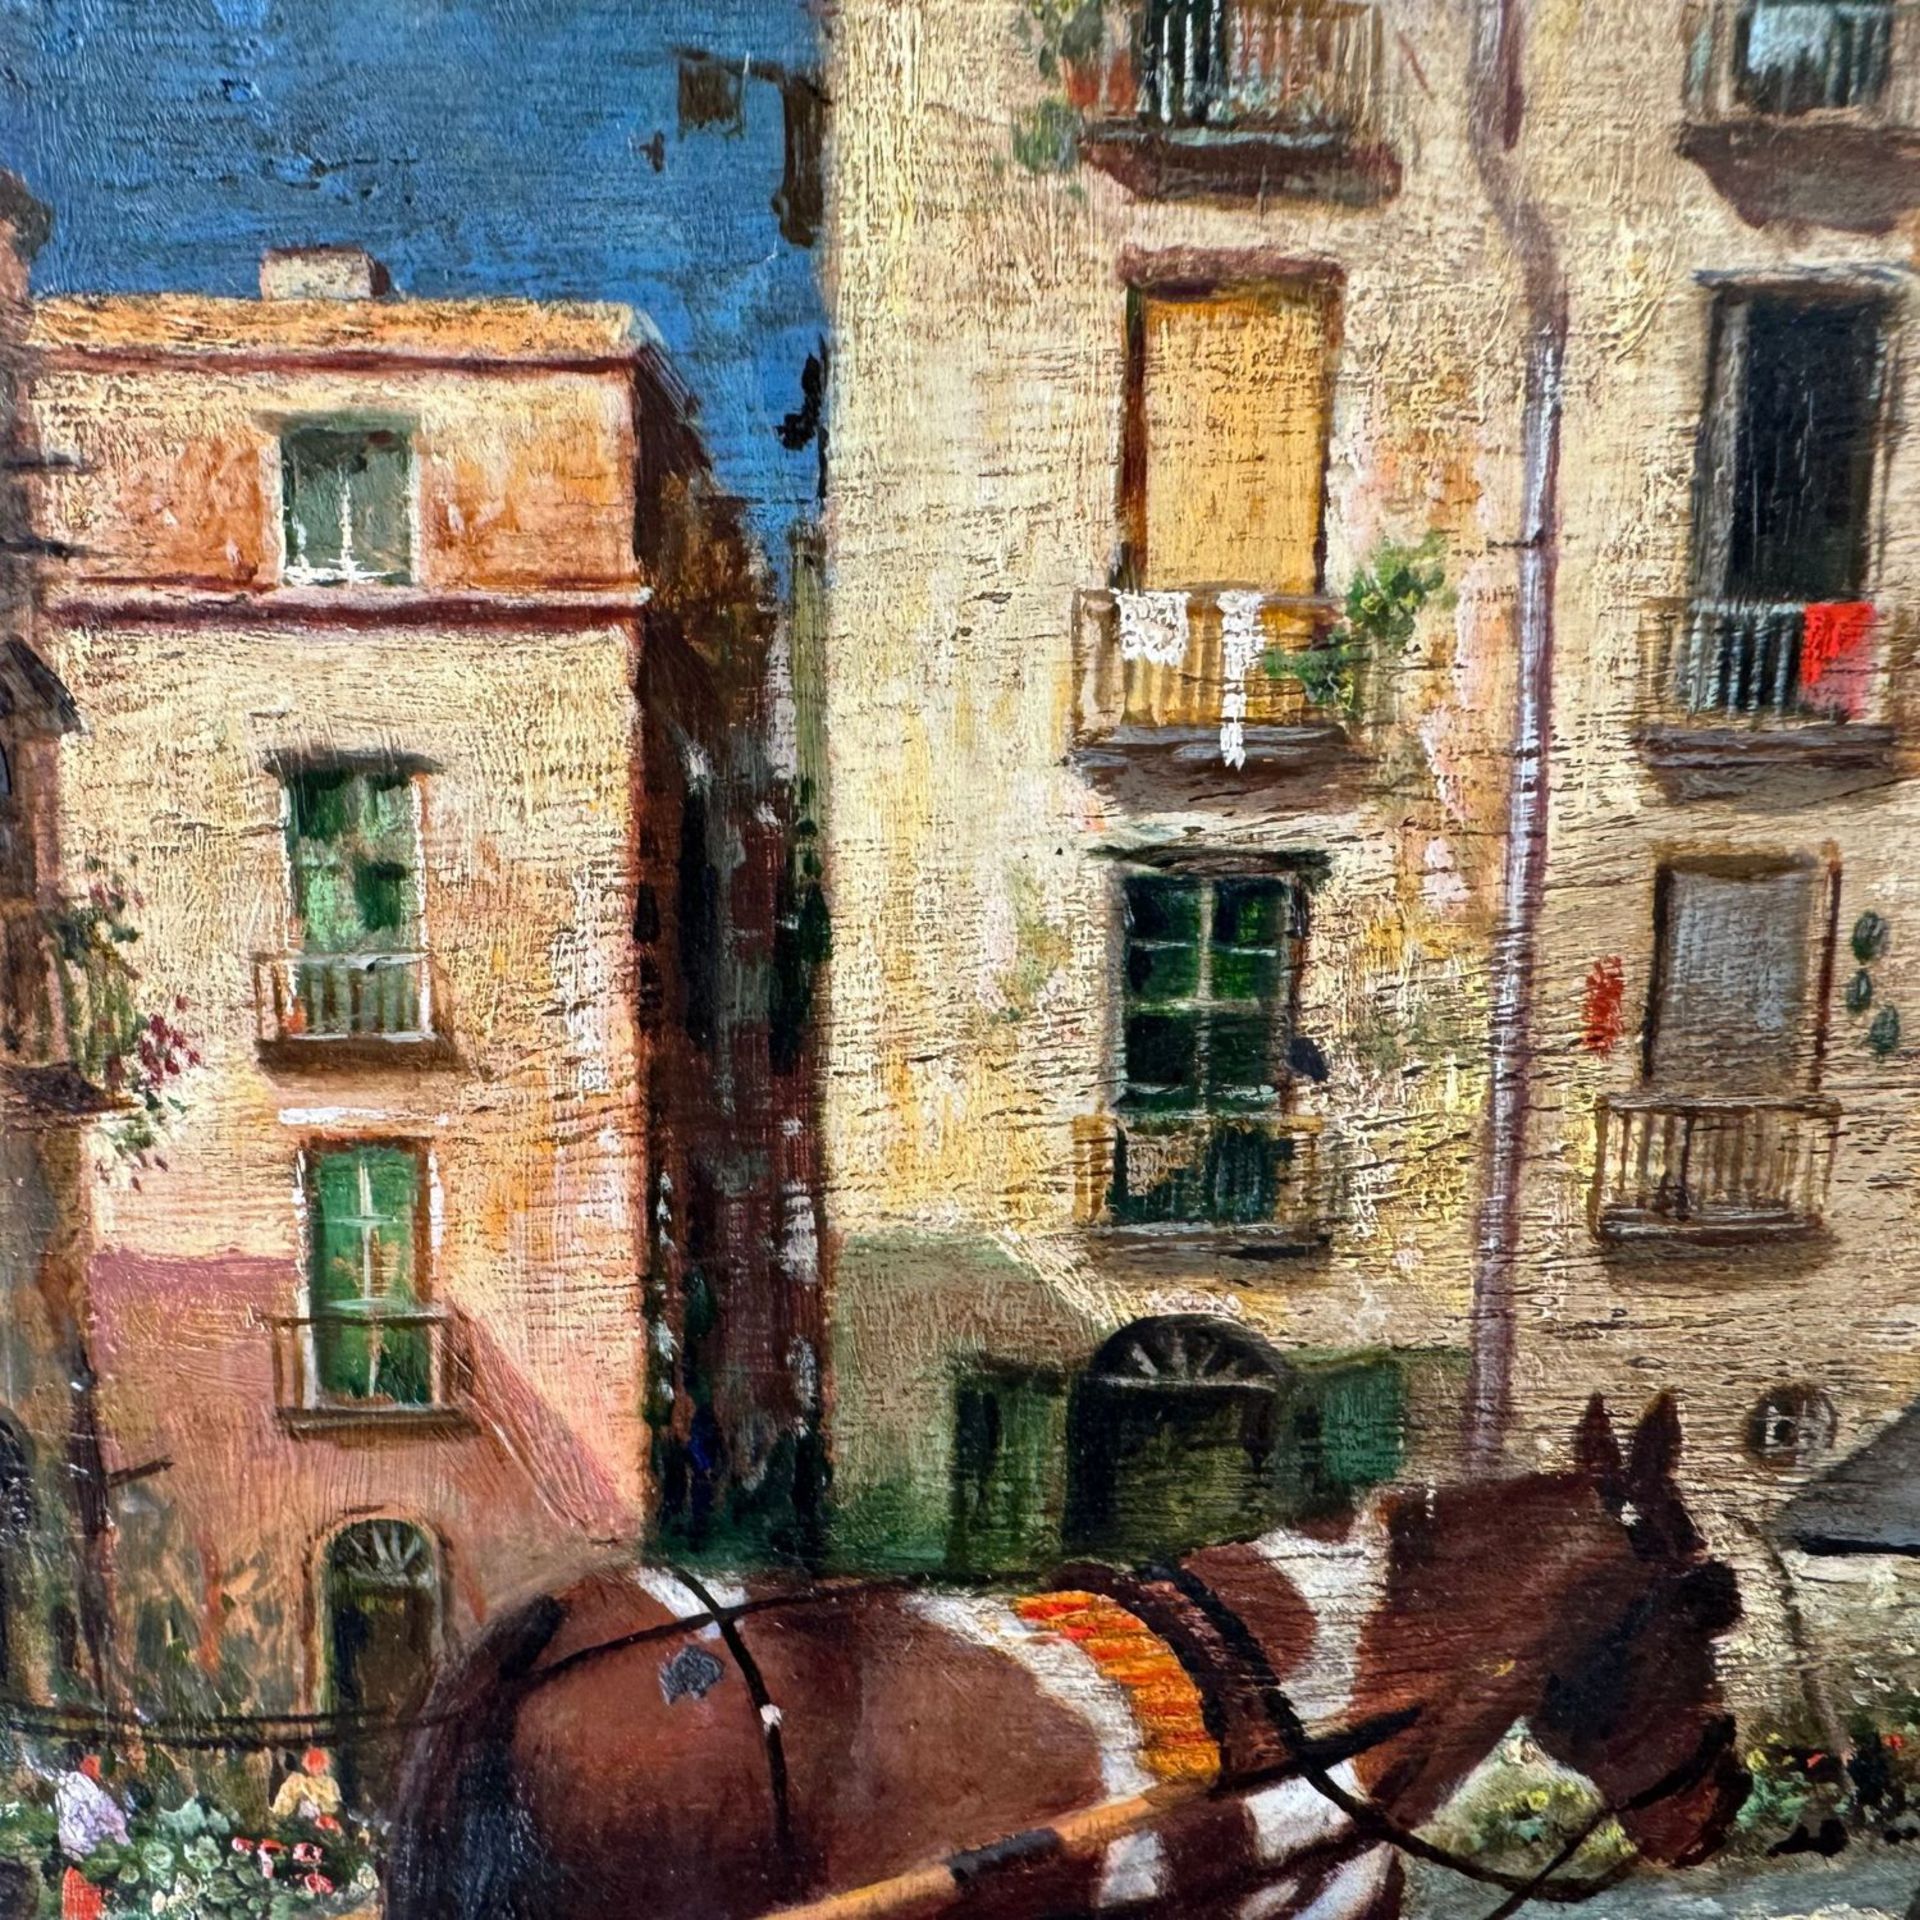 Neapolitan street with carriage and characters - E. Cerrone (1935 - 2010) - Image 5 of 7